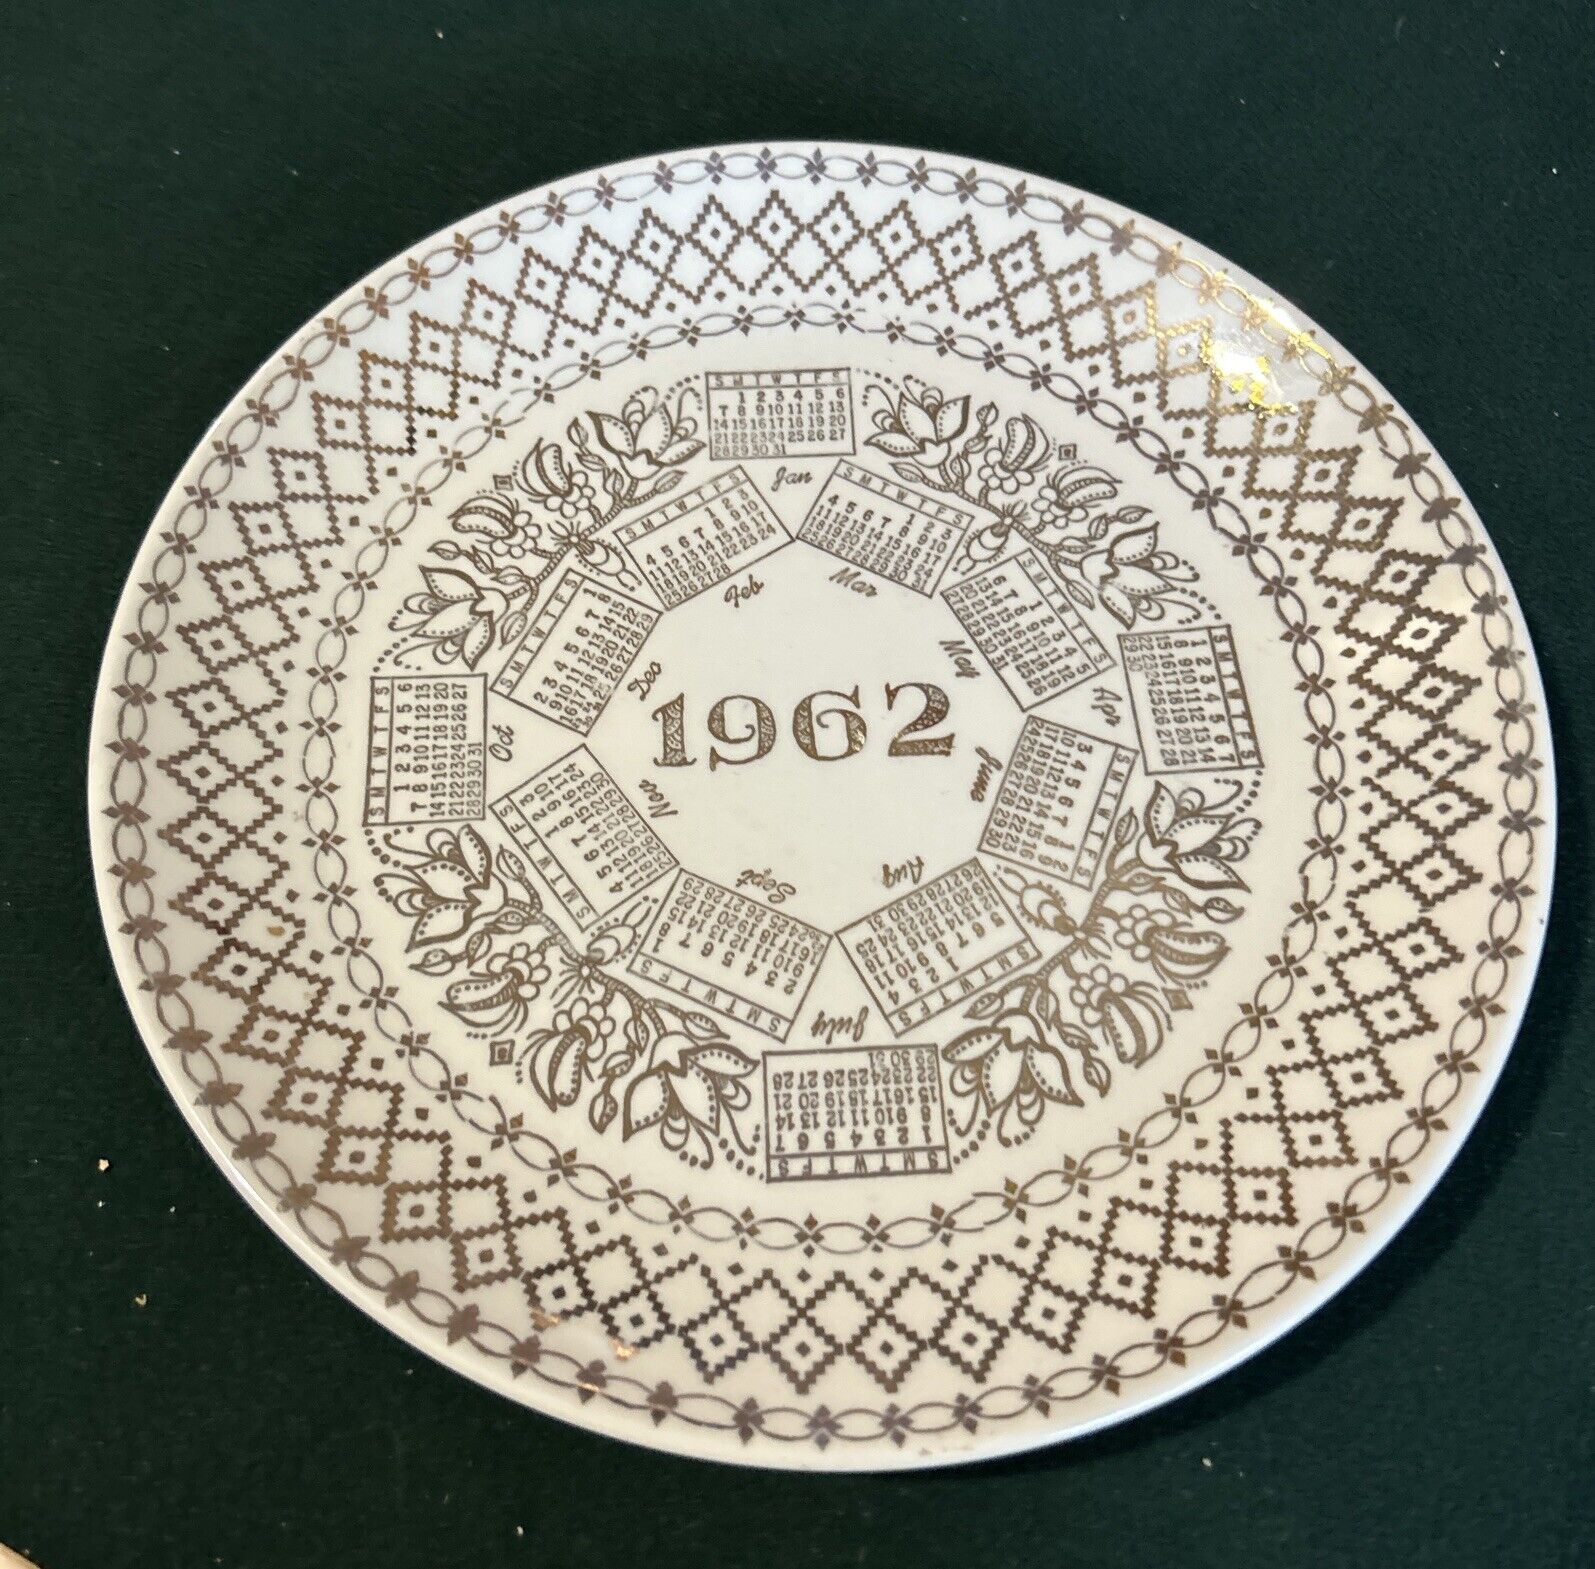 VINTAGE 1962 CALENDAR PLATE GOLD AND WHITE